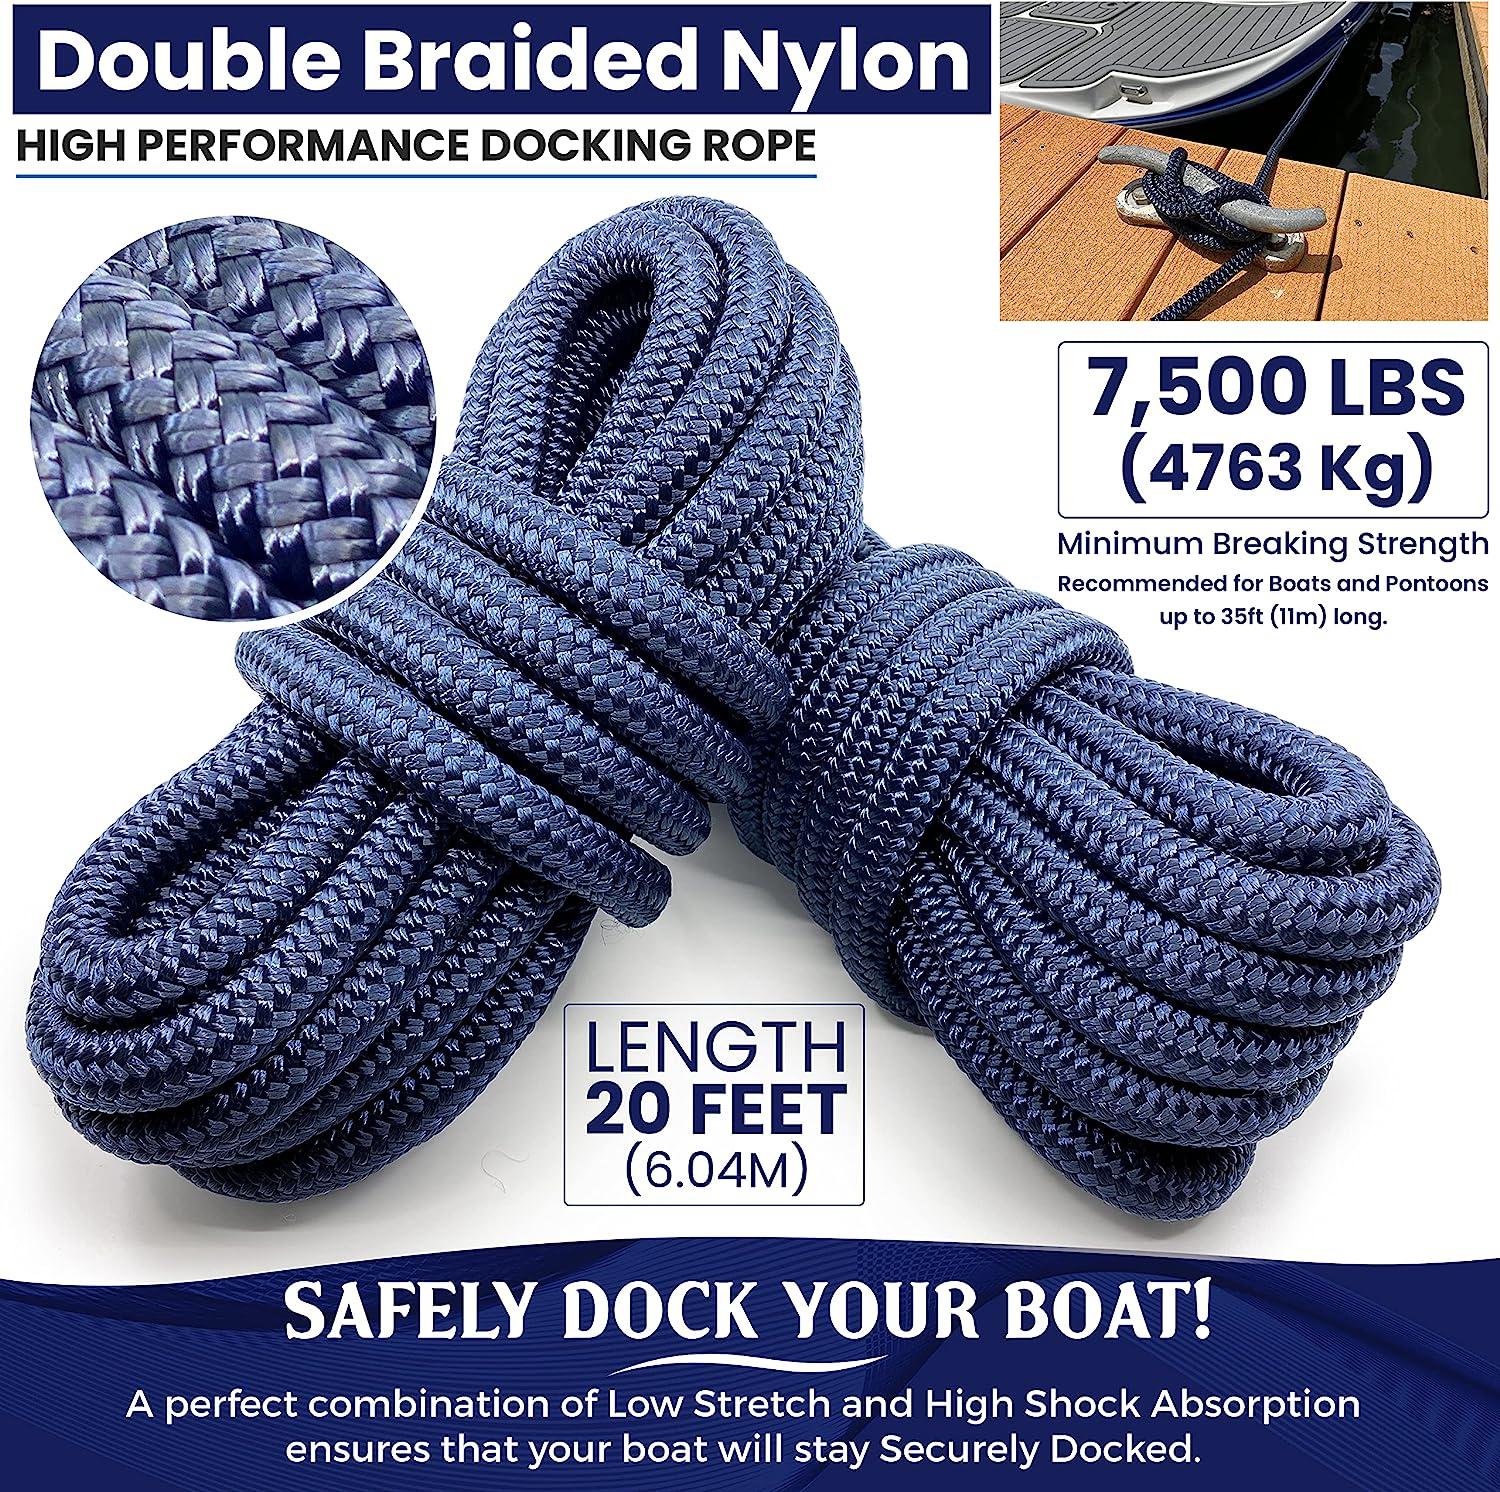 WAVESRX 1/2 x 20 (2PK) High-Performance Dock Lines for Boats and Pontoons, Premium Mooring & Docking Rope